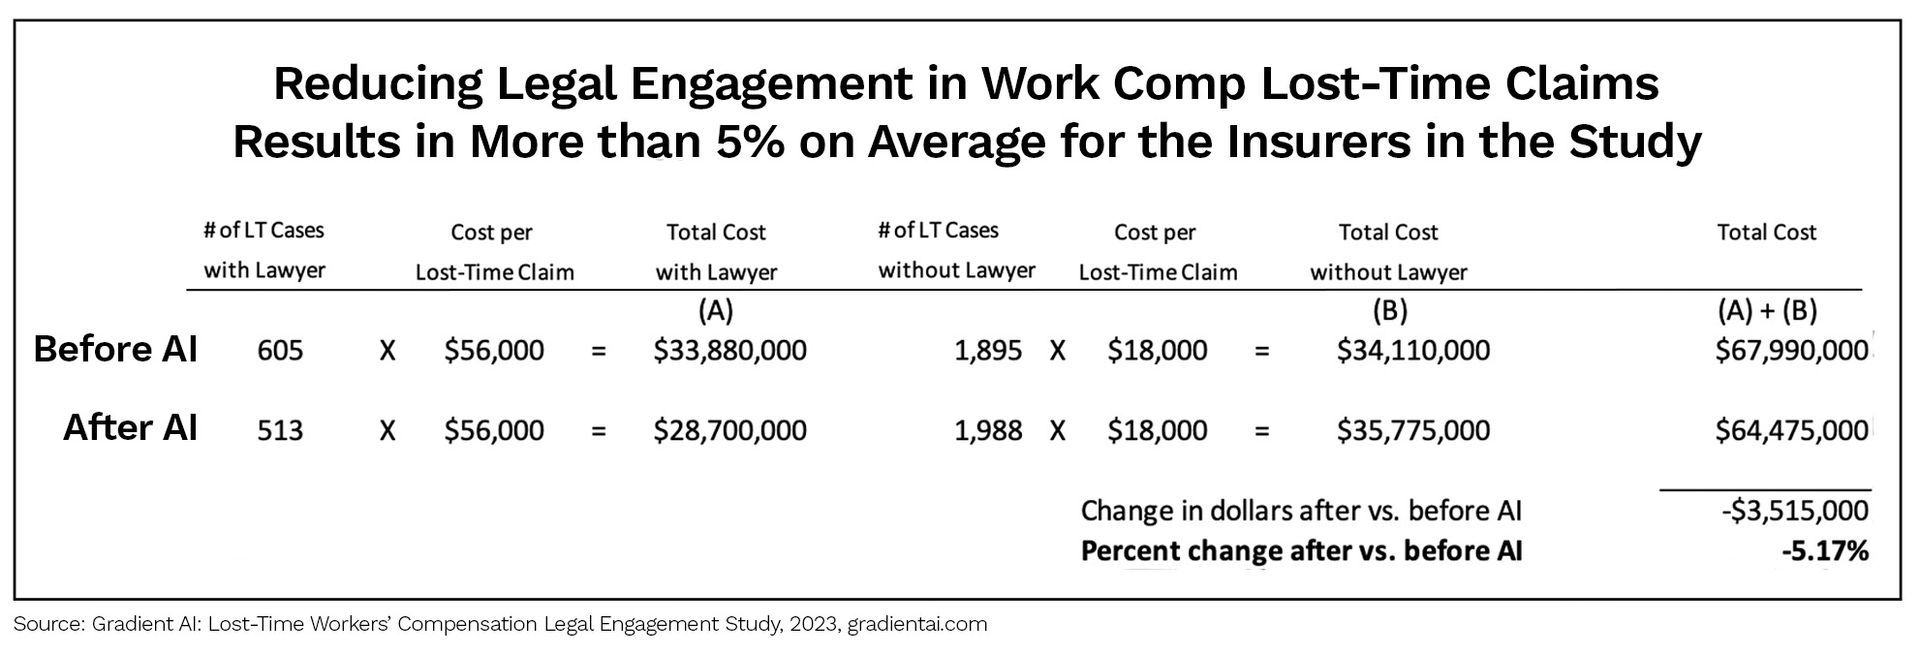 Reducing Legal Engagement in Work Comp Lost-Time Claims